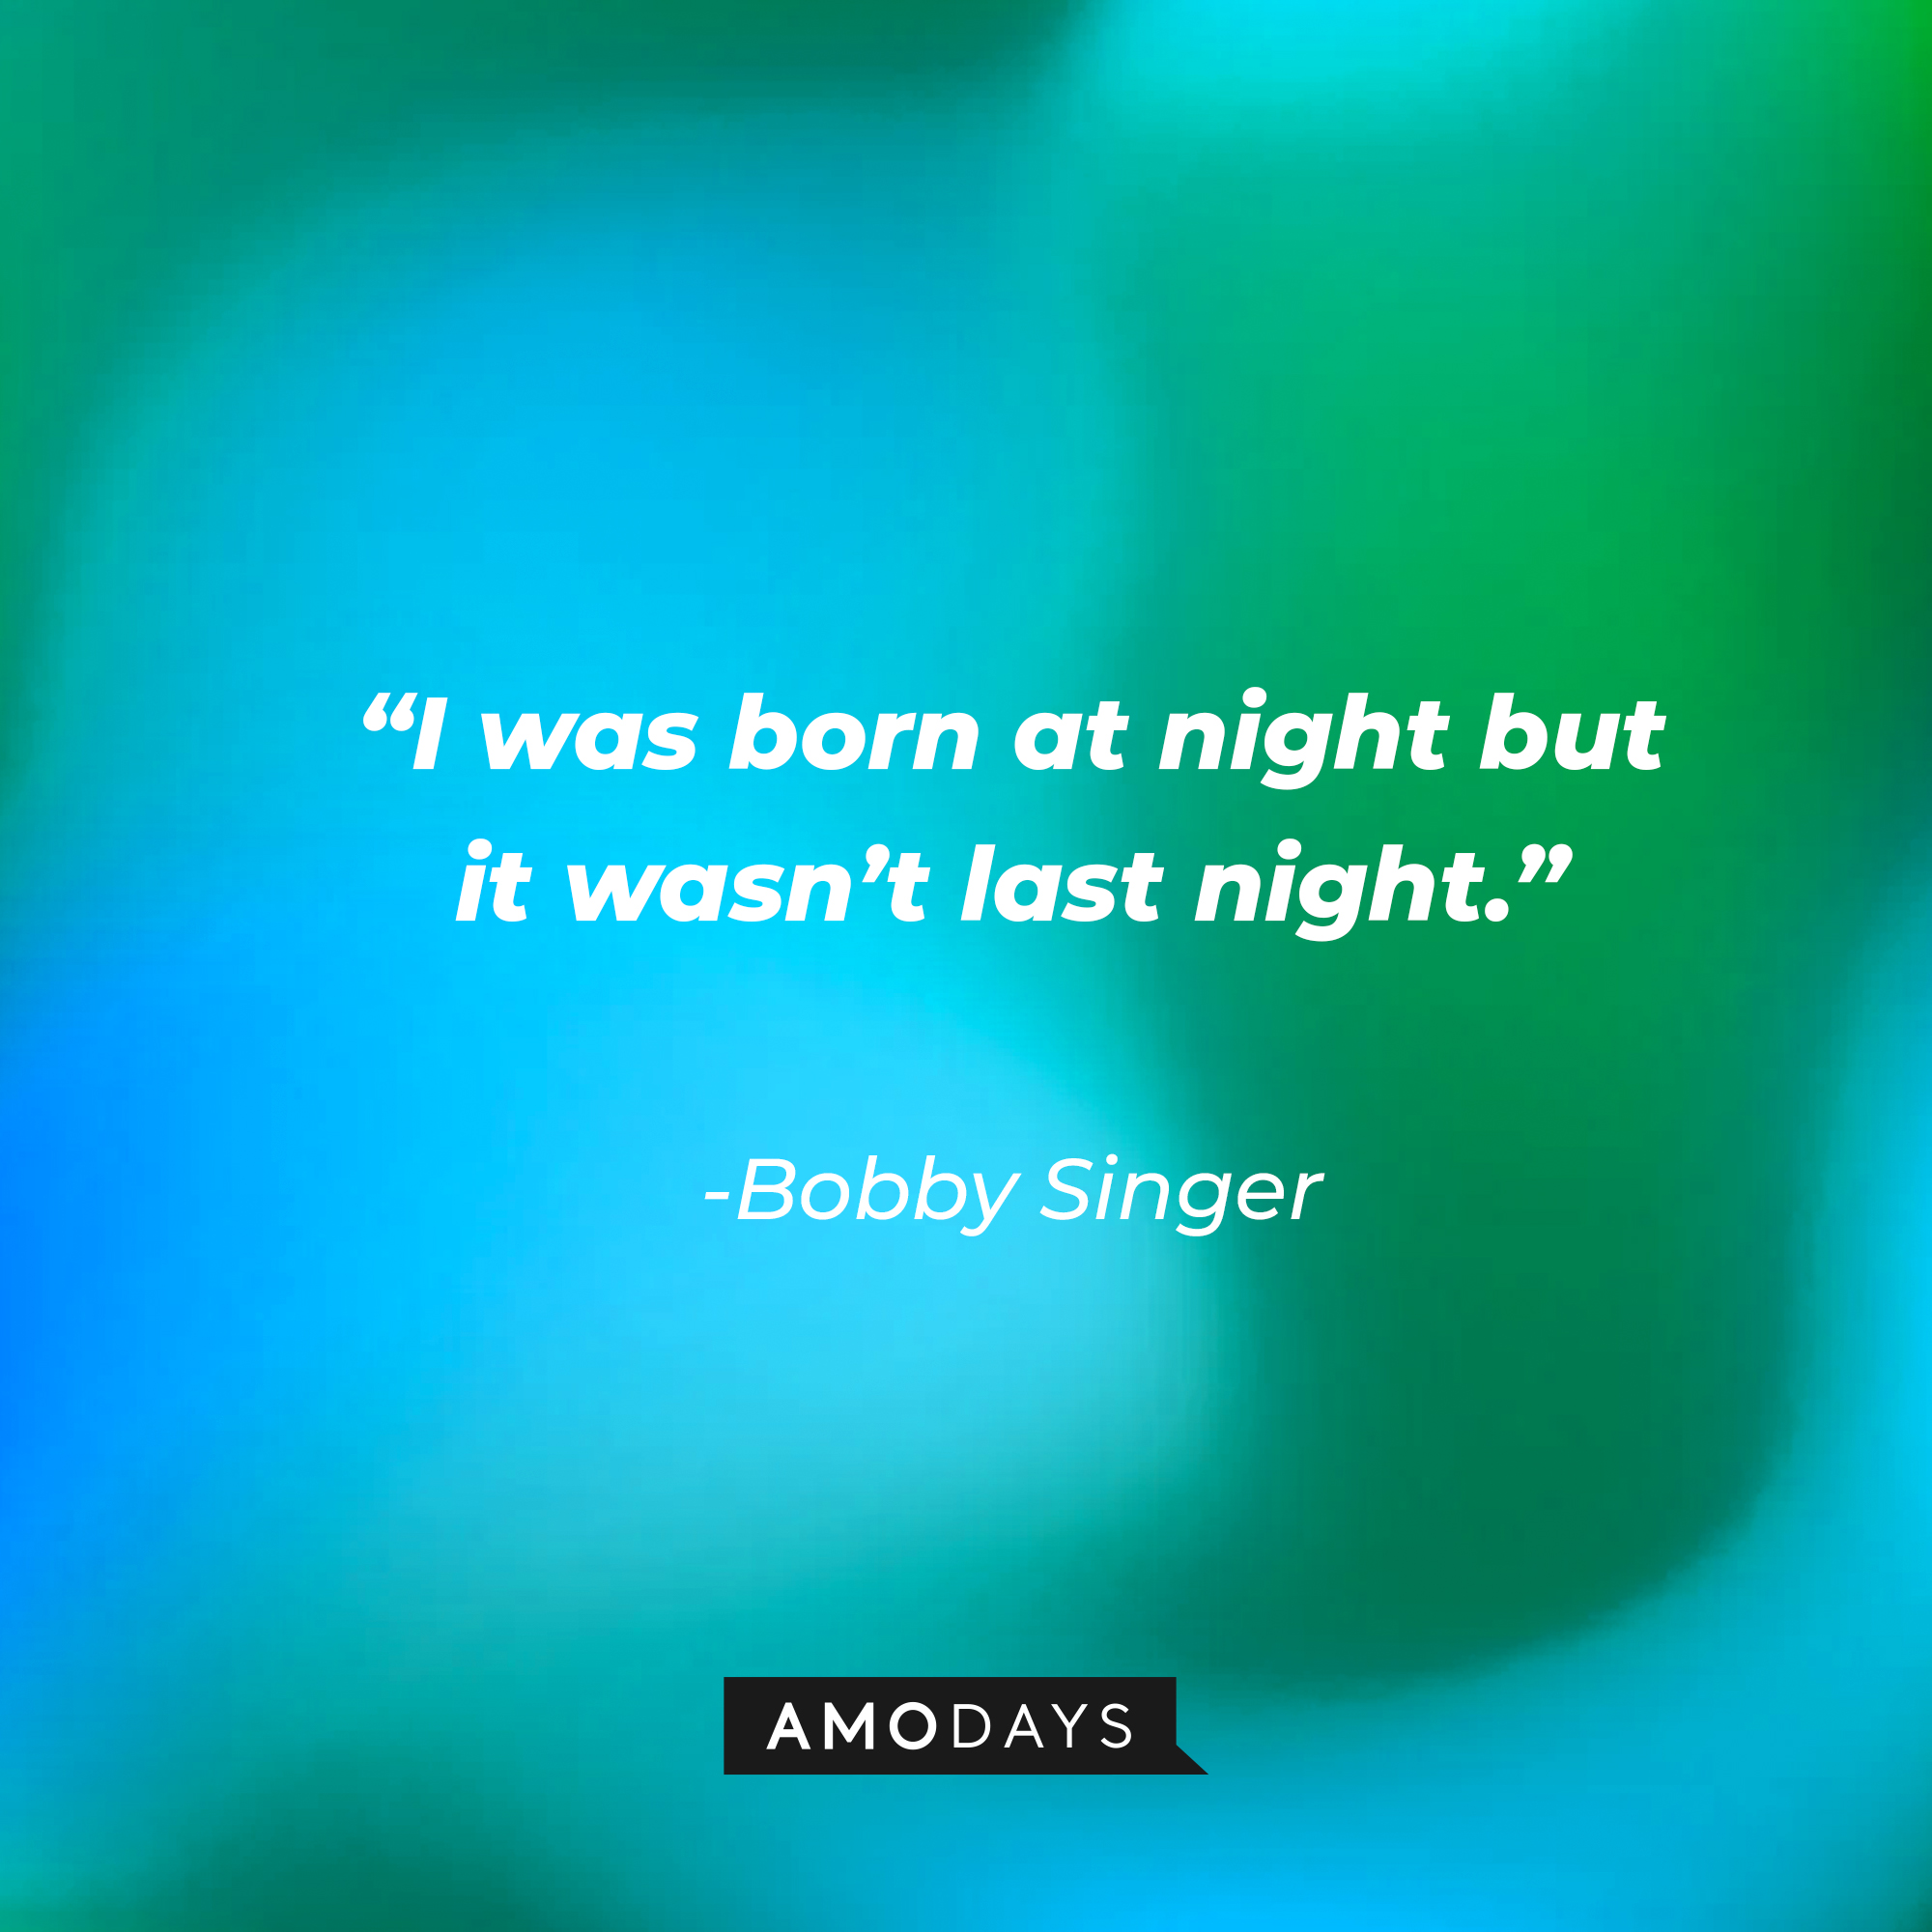 Bobby Singer's quote: "I was born at night but it wasn't last night." | Source: Amodays